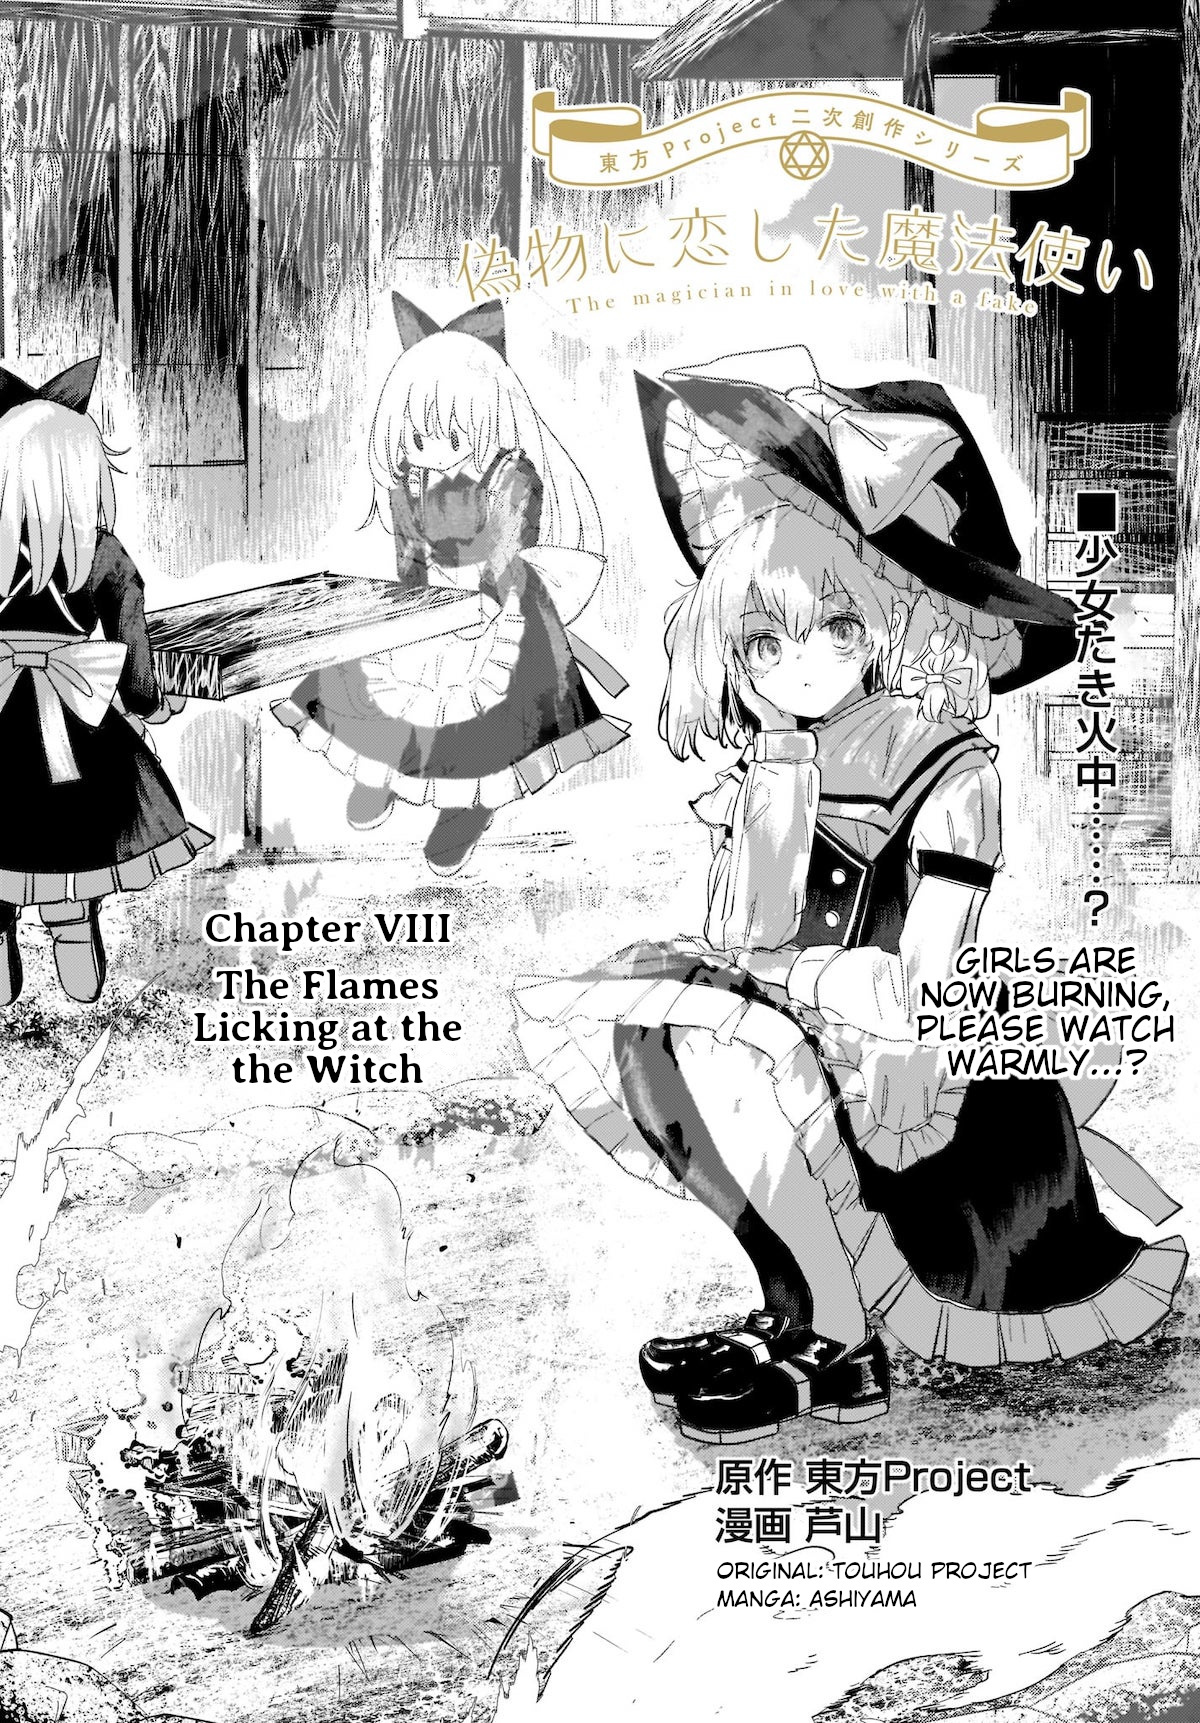 Touhou - The Magician Who Loved A Fake (Doujinshi) Vol.2 Chapter 8: The Flames Licking At The Witch - Picture 1